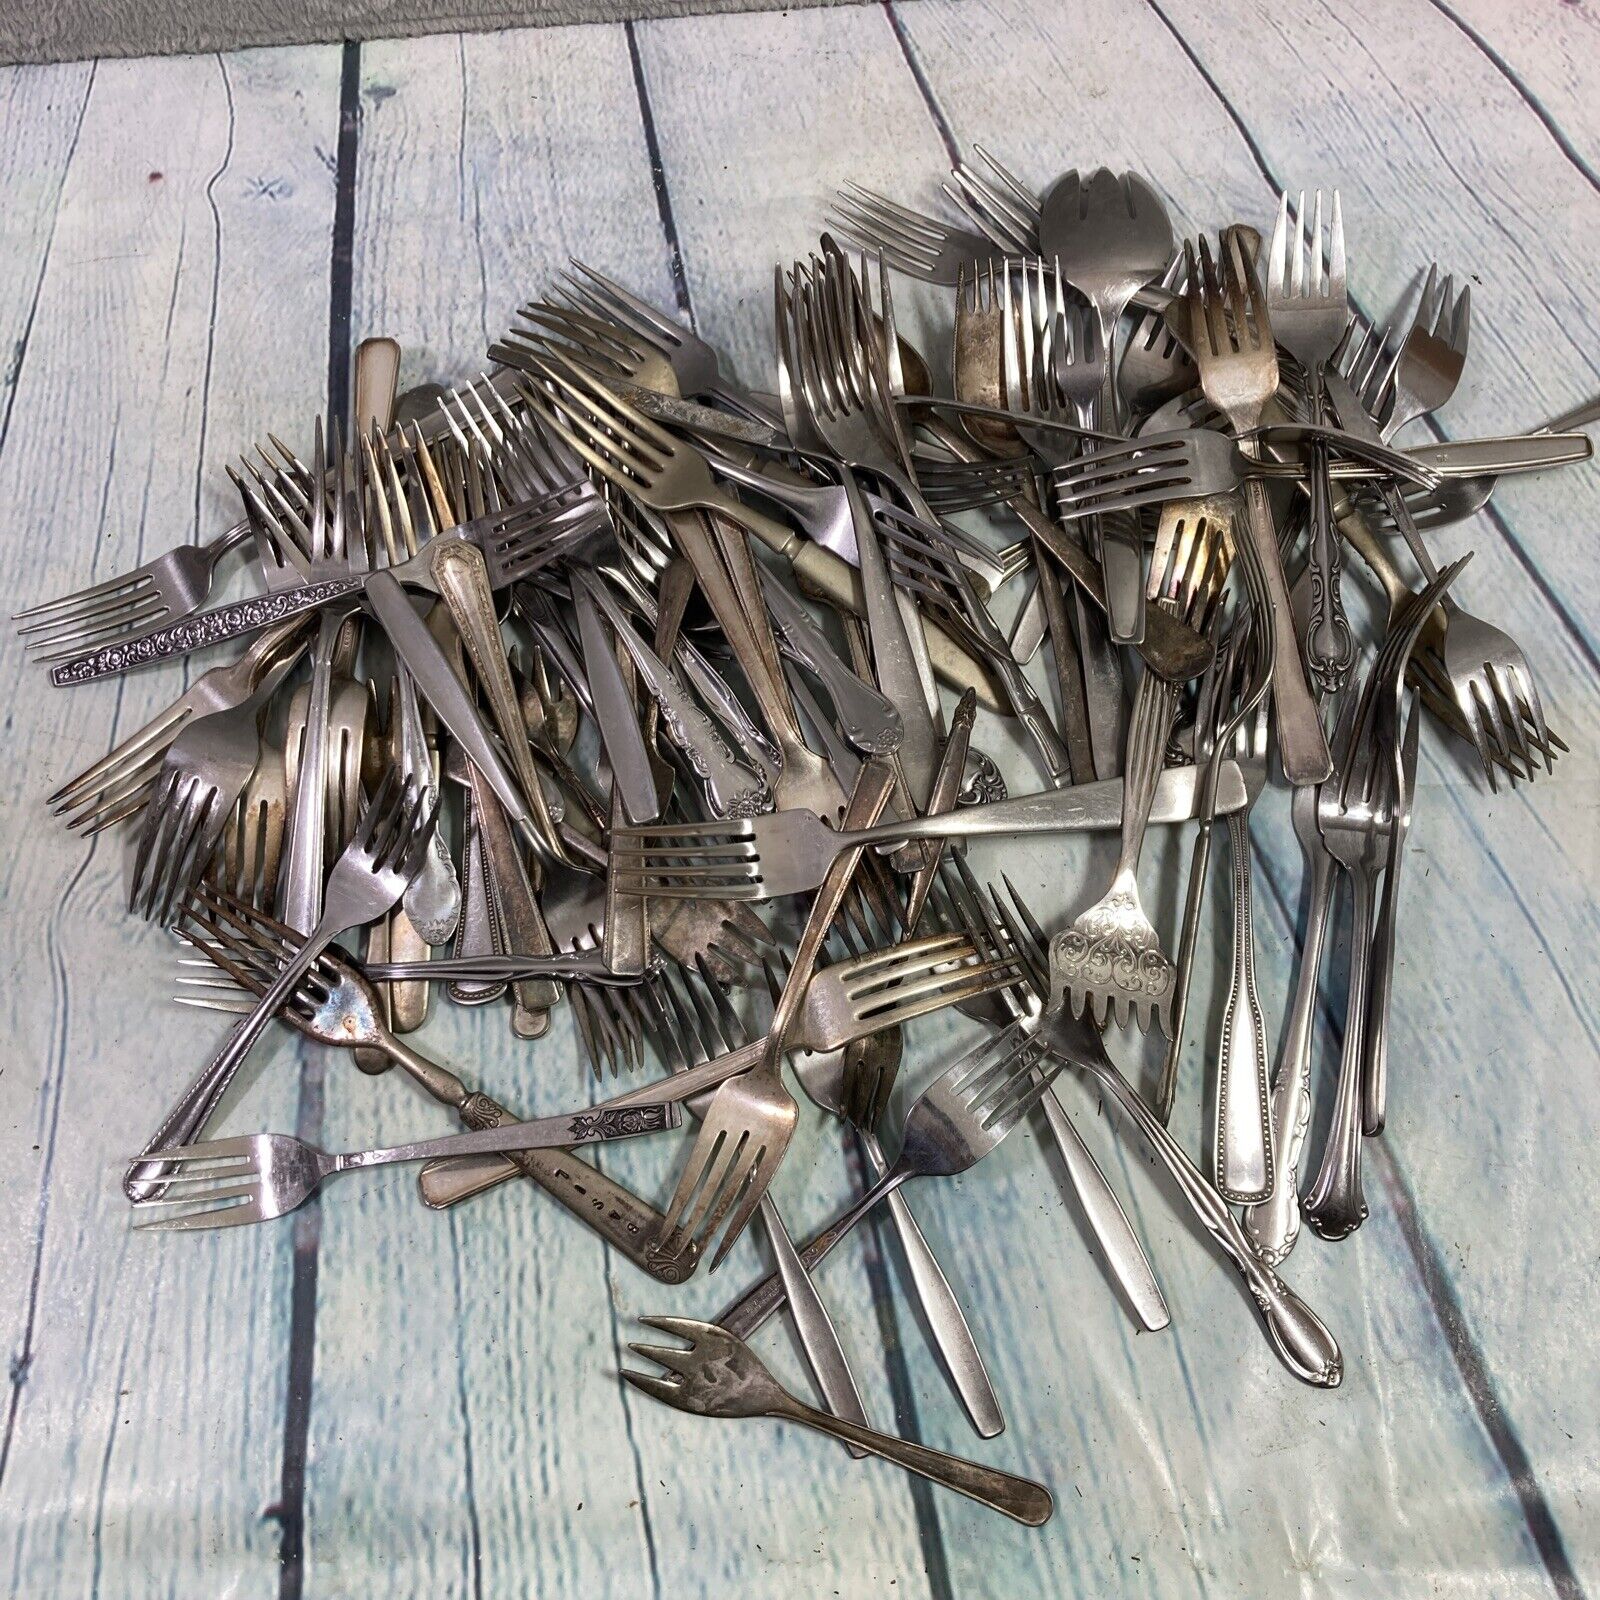 80+ Stainless Silverplate Forks Crafting Lot Flatware Silverware Various Sizes